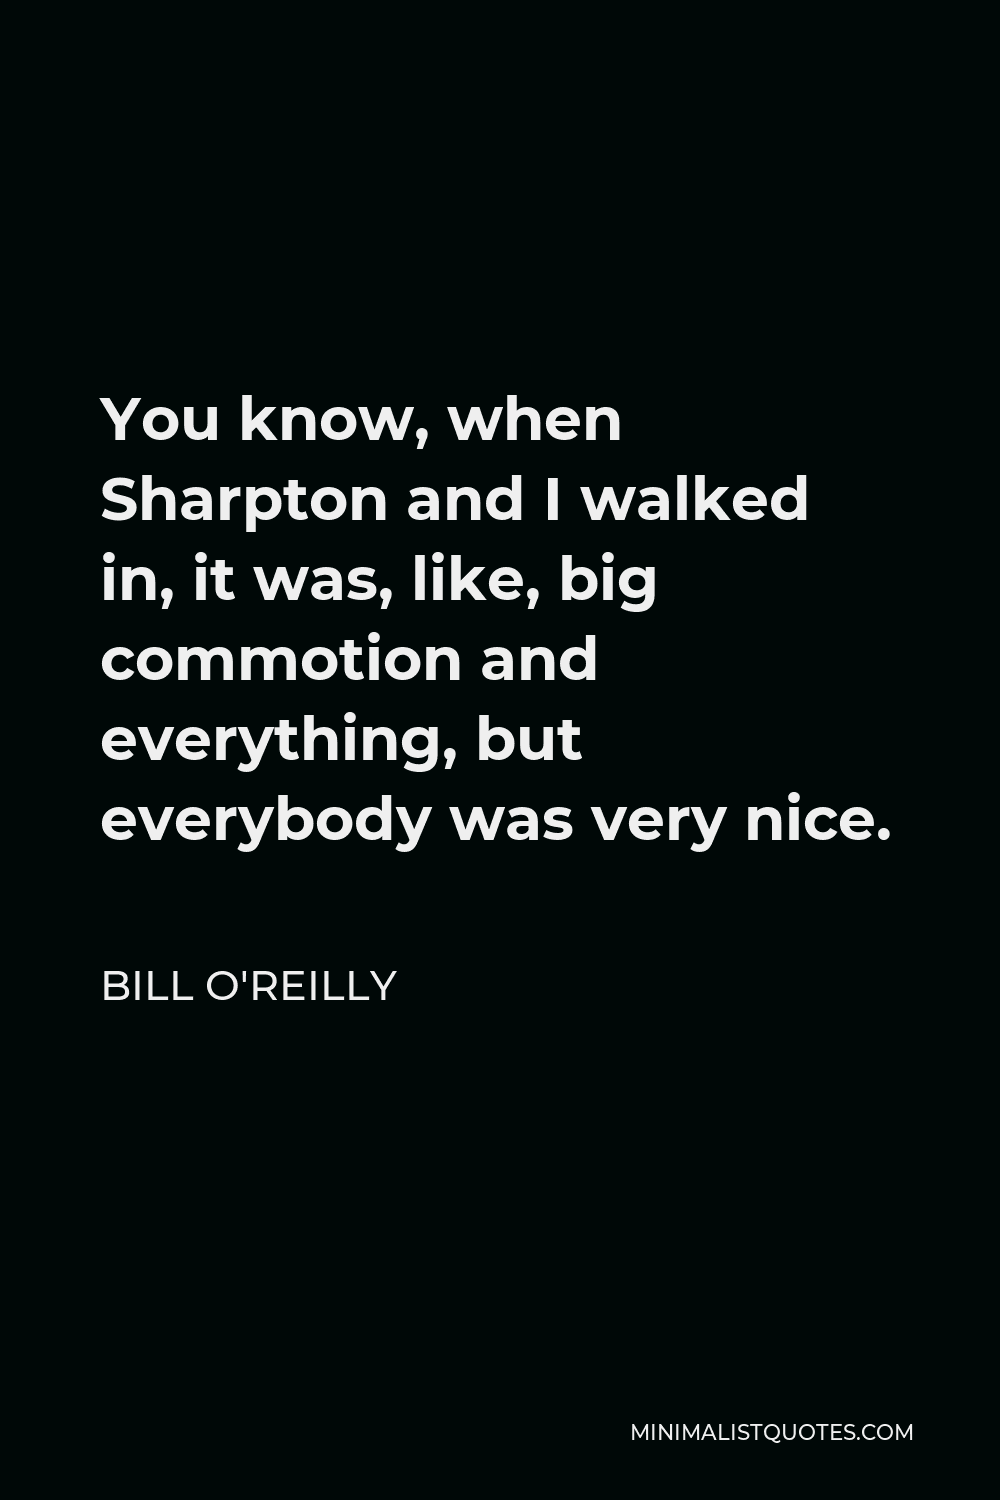 Bill O'Reilly Quote - You know, when Sharpton and I walked in, it was, like, big commotion and everything, but everybody was very nice.